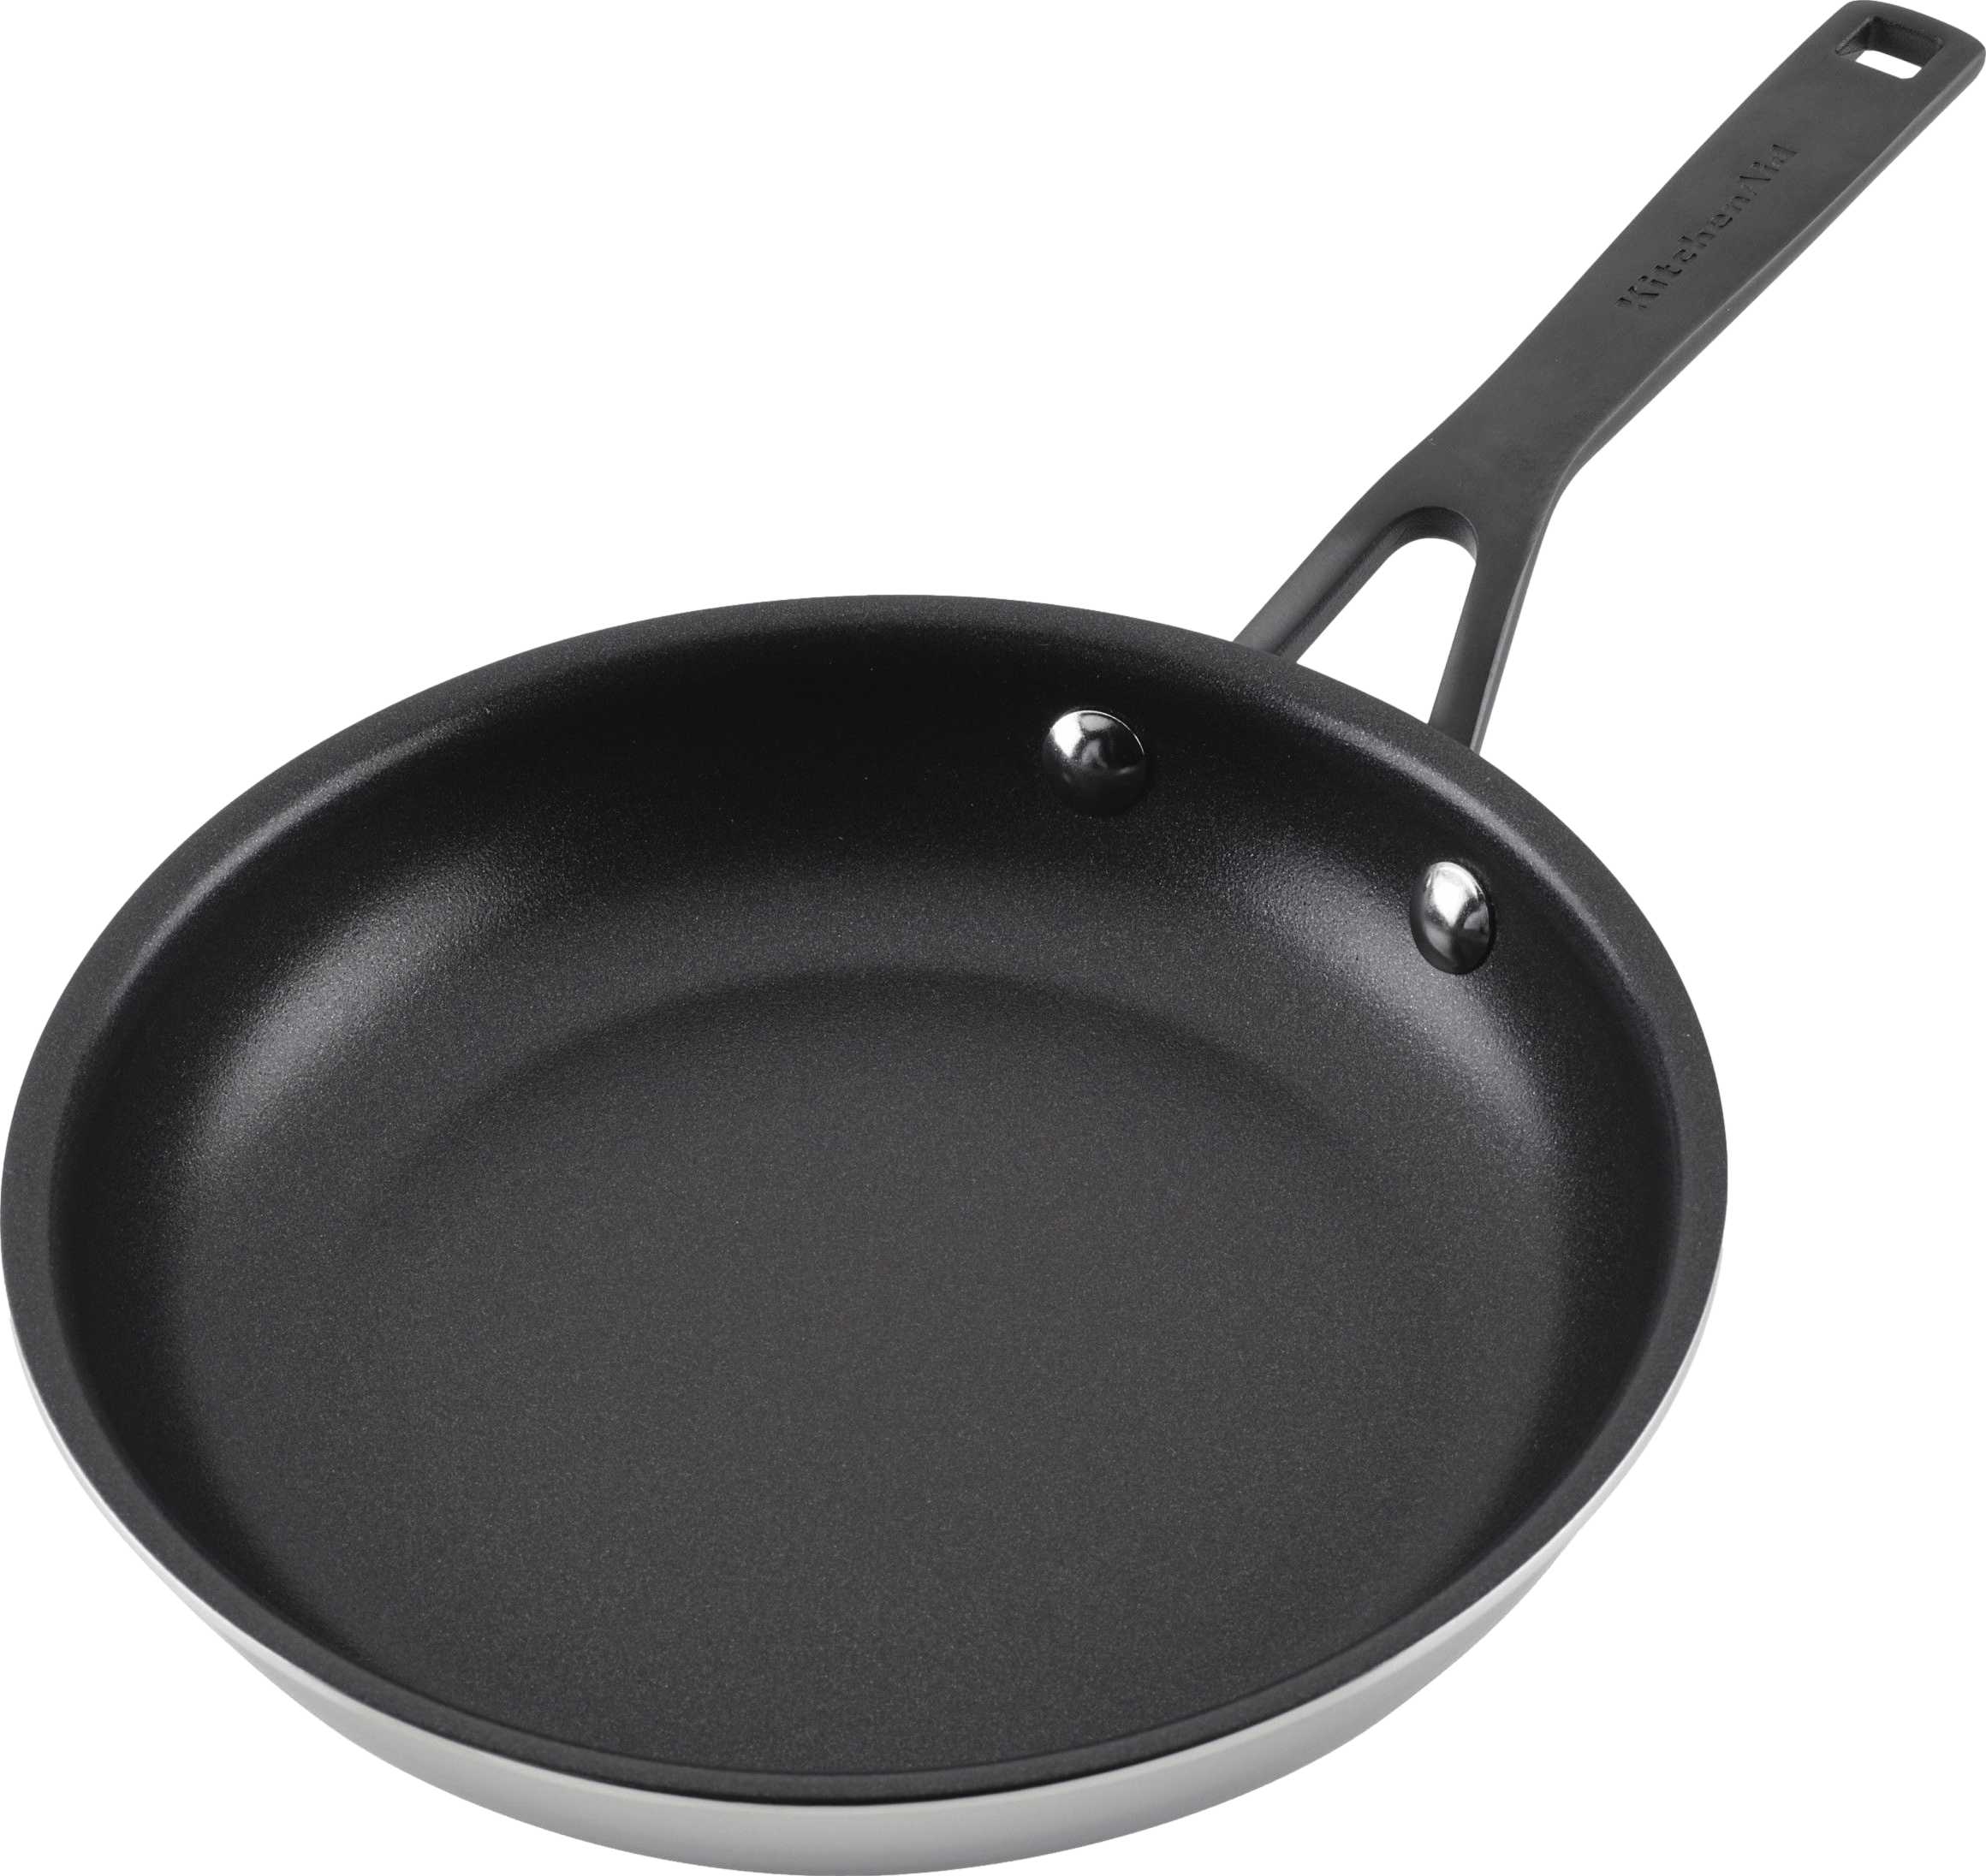 KitchenAid 3-Ply Base Brushed Stainless Steel Nonstick Fry Pan/Skillet, 12  Inch